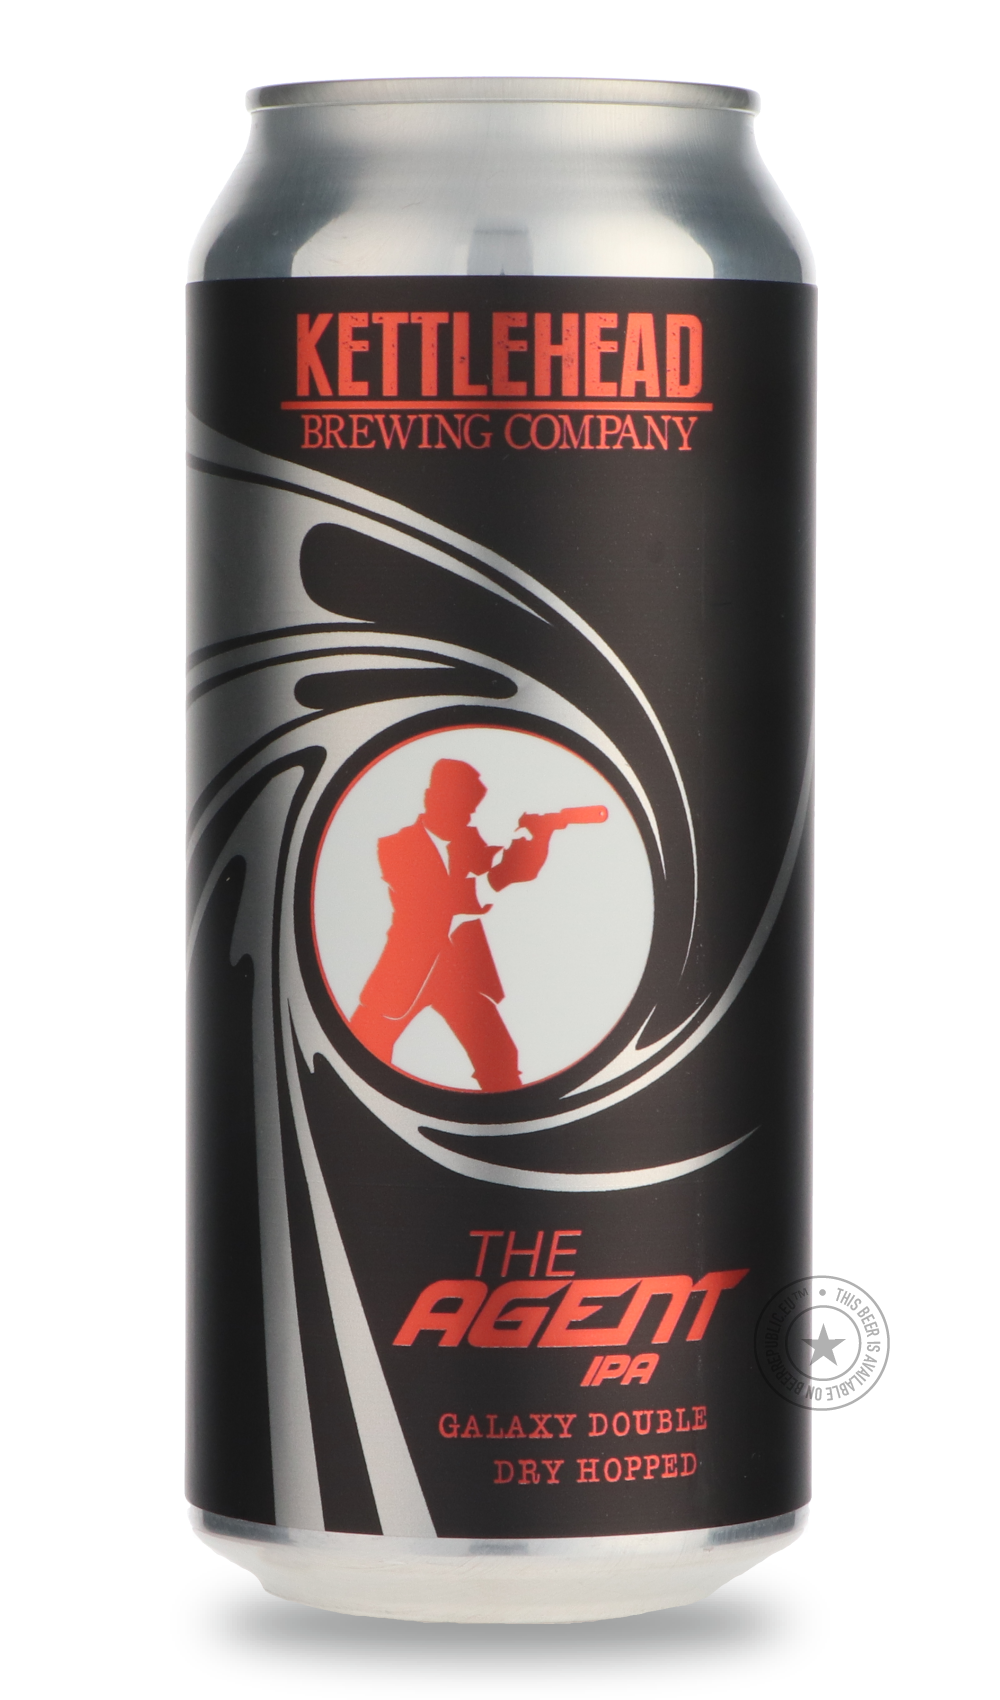 -Kettlehead- The Agent-IPA- Only @ Beer Republic - The best online beer store for American & Canadian craft beer - Buy beer online from the USA and Canada - Bier online kopen - Amerikaans bier kopen - Craft beer store - Craft beer kopen - Amerikanisch bier kaufen - Bier online kaufen - Acheter biere online - IPA - Stout - Porter - New England IPA - Hazy IPA - Imperial Stout - Barrel Aged - Barrel Aged Imperial Stout - Brown - Dark beer - Blond - Blonde - Pilsner - Lager - Wheat - Weizen - Amber - Barley Win